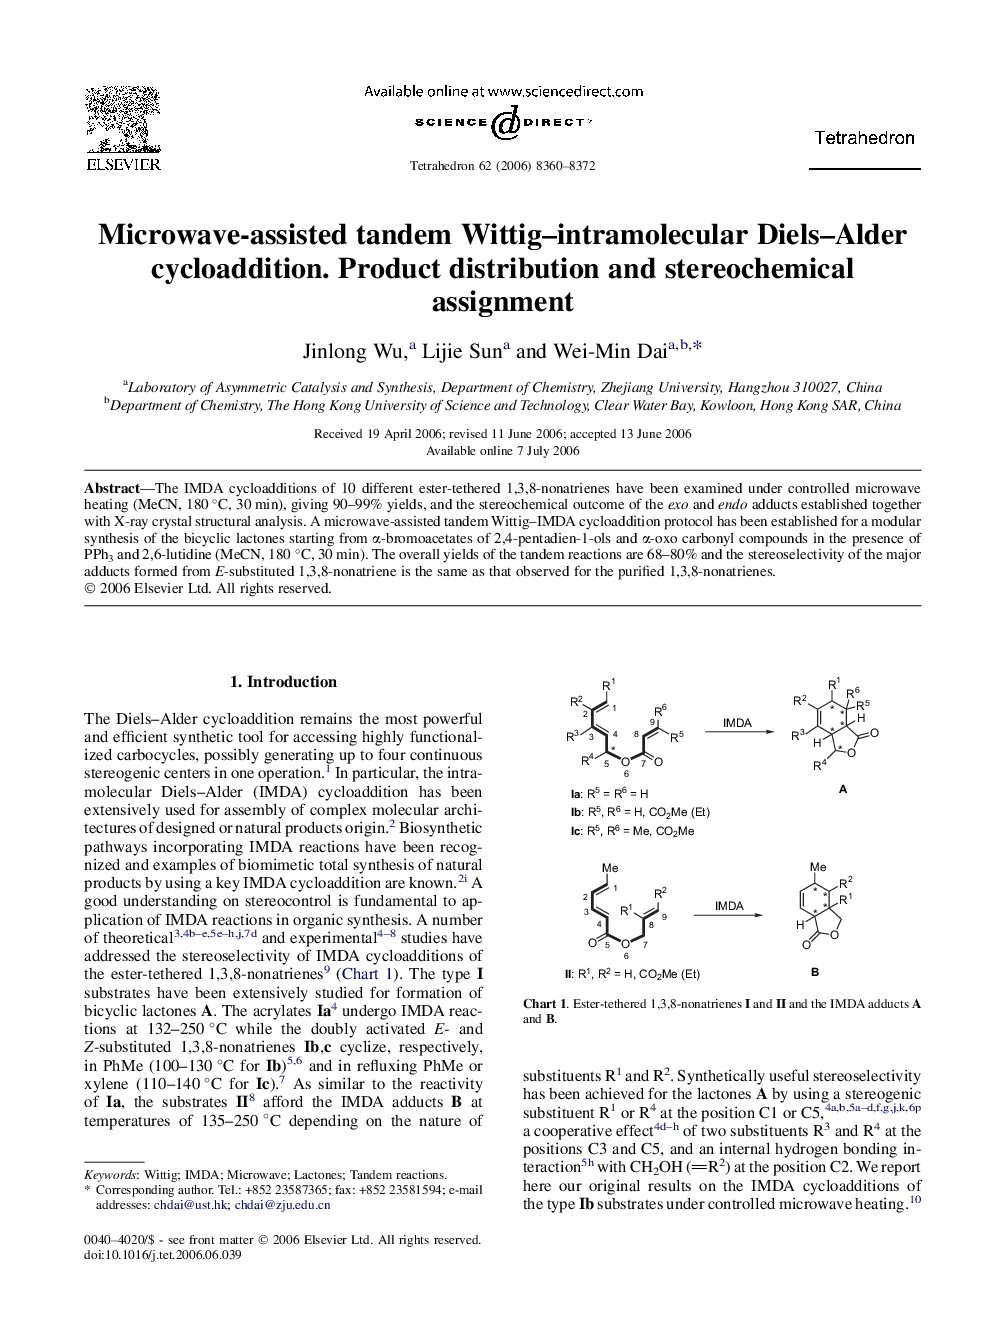 Microwave-assisted tandem Wittig-intramolecular Diels-Alder cycloaddition. Product distribution and stereochemical assignment